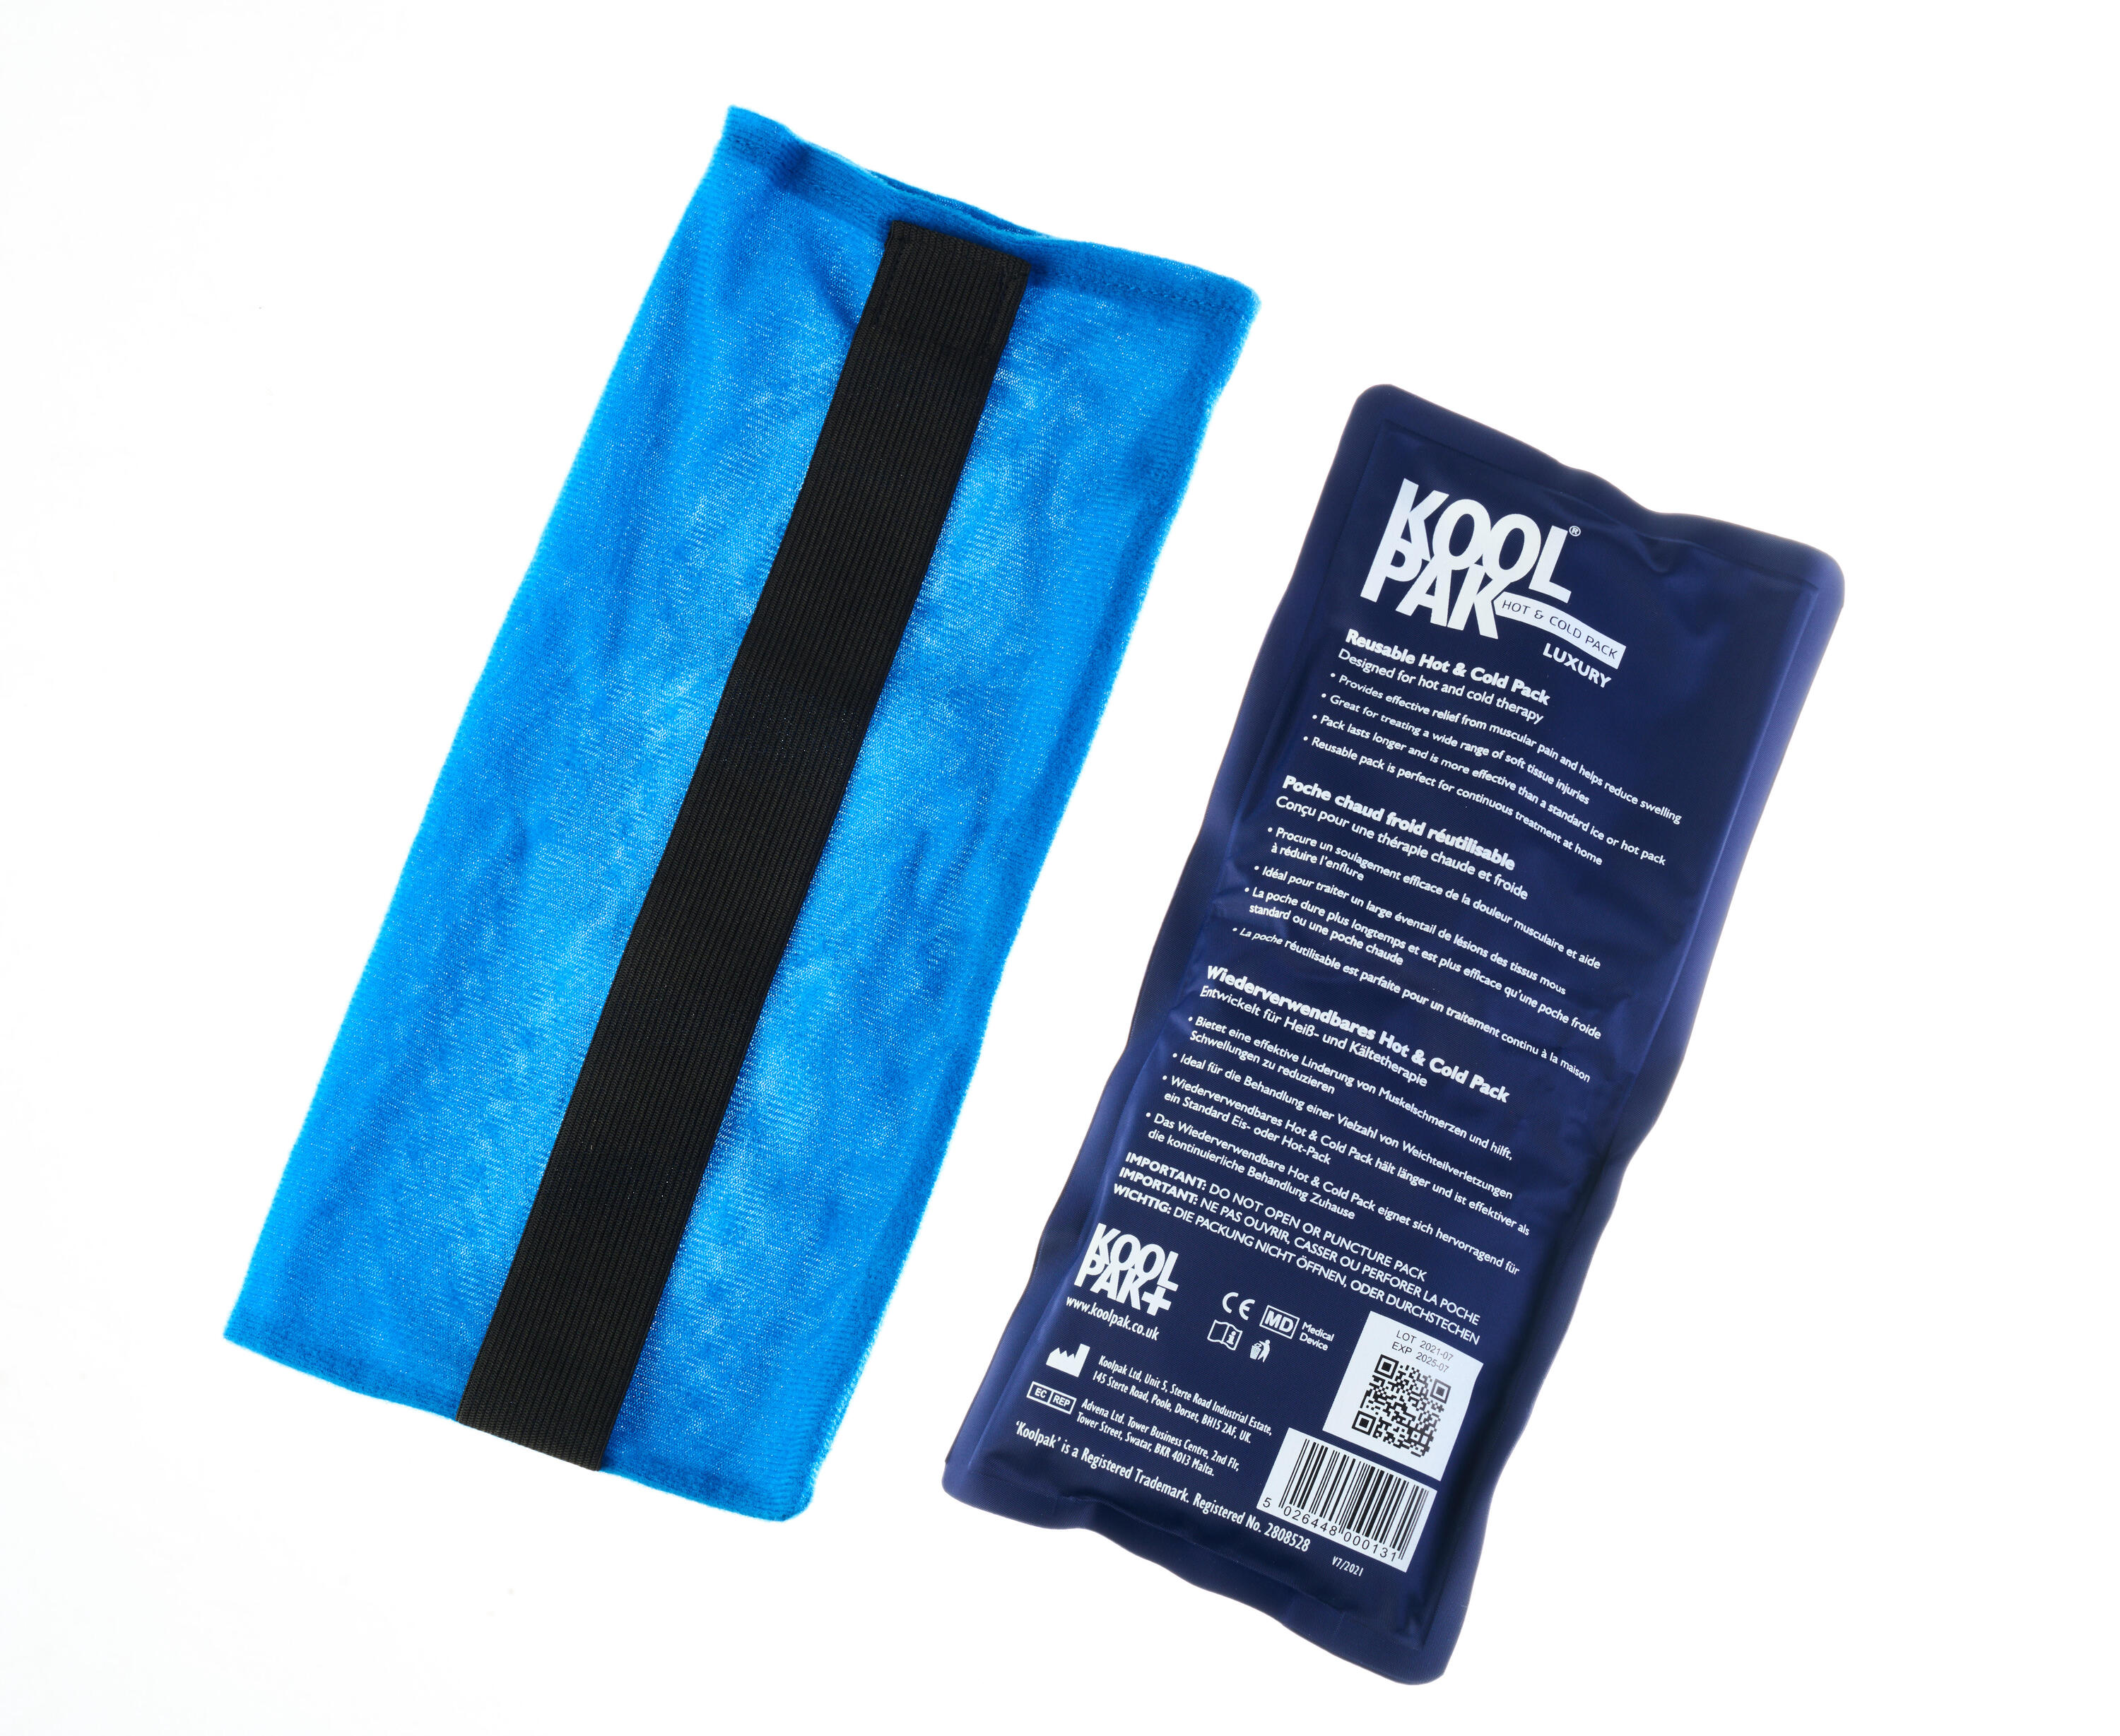 Koolpak Luxury Reusable Hot Cold Pack - 12 x 29cm with Elasticated Holster 5/5